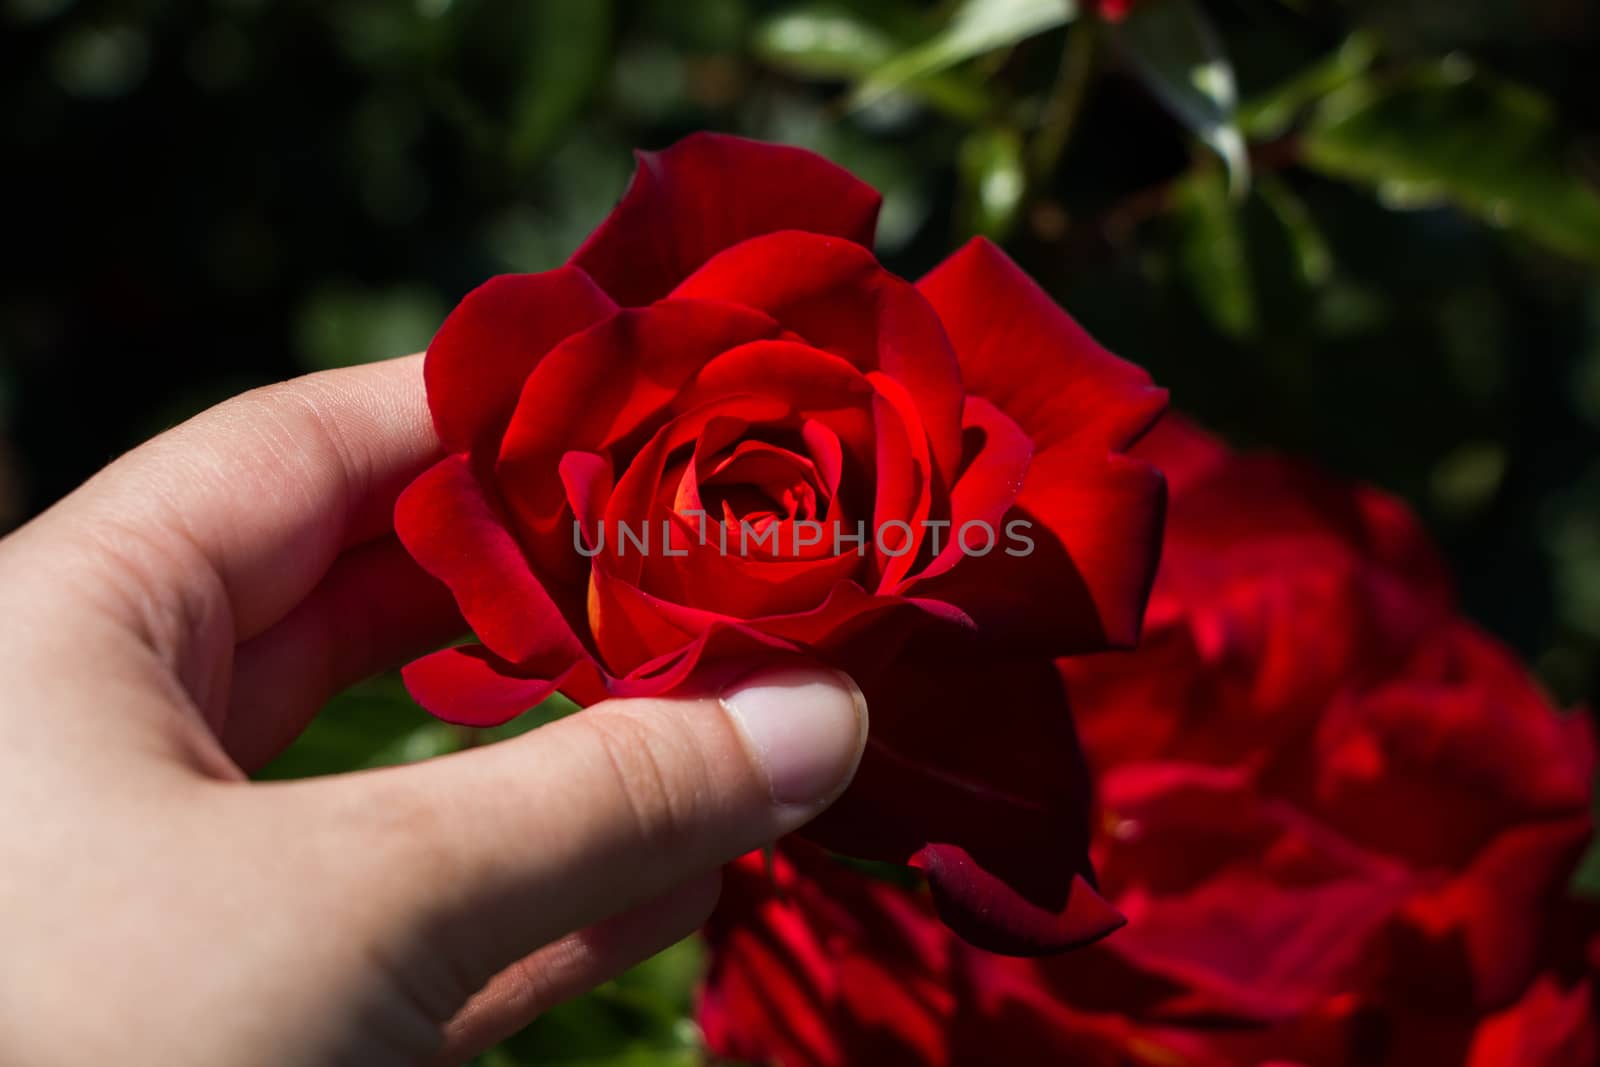 Hand holding a  colorful Rose Flower